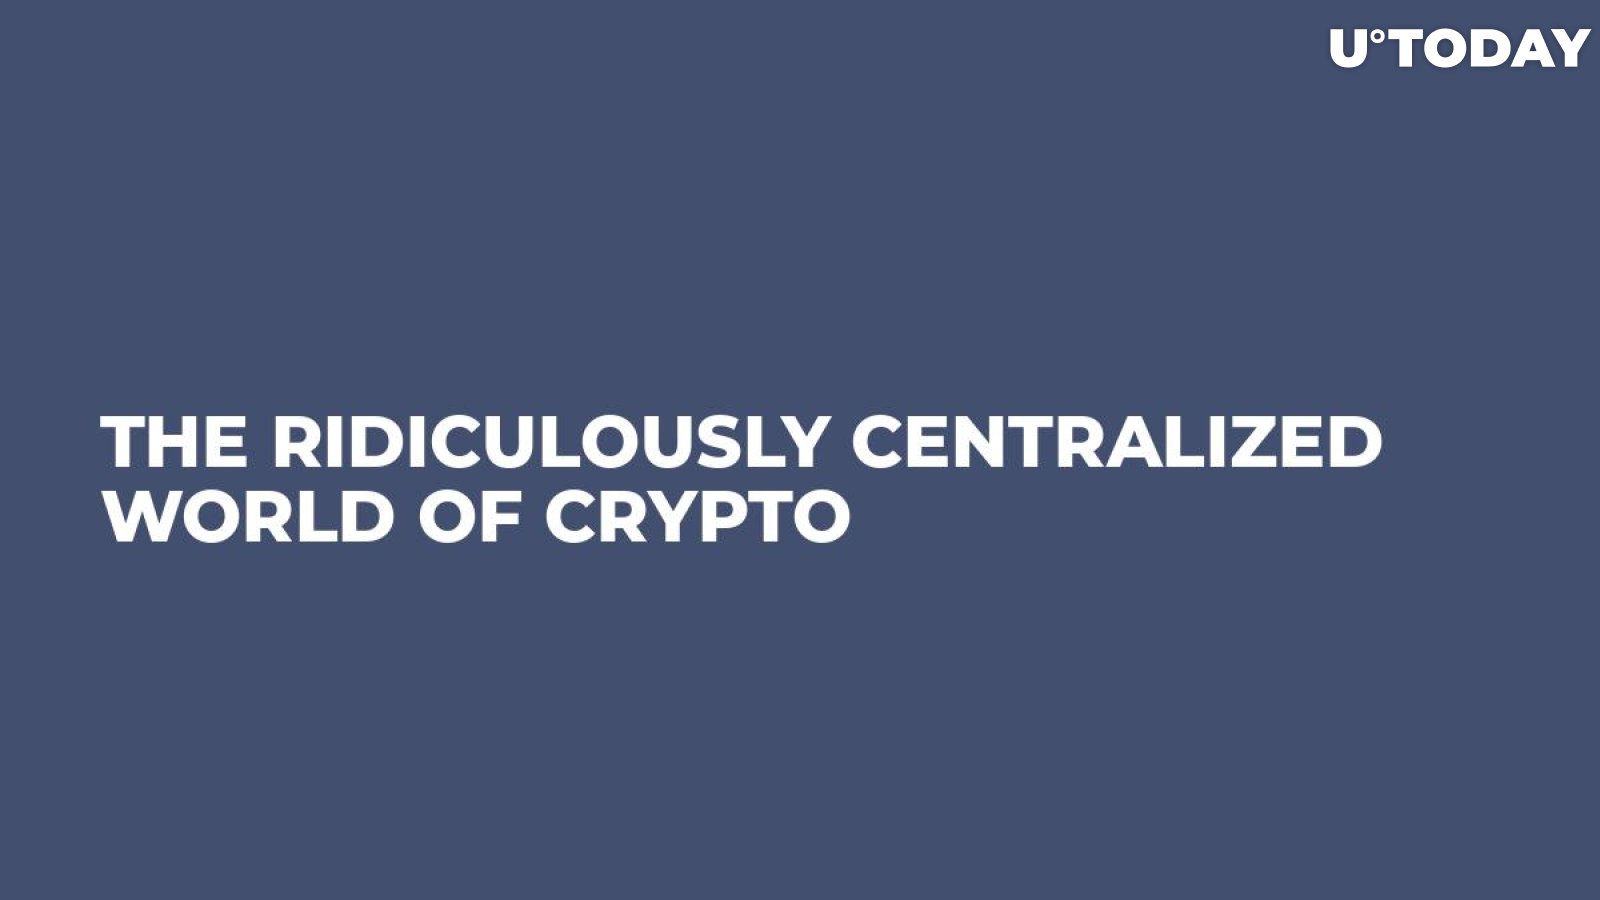 The Ridiculously Centralized World of Crypto